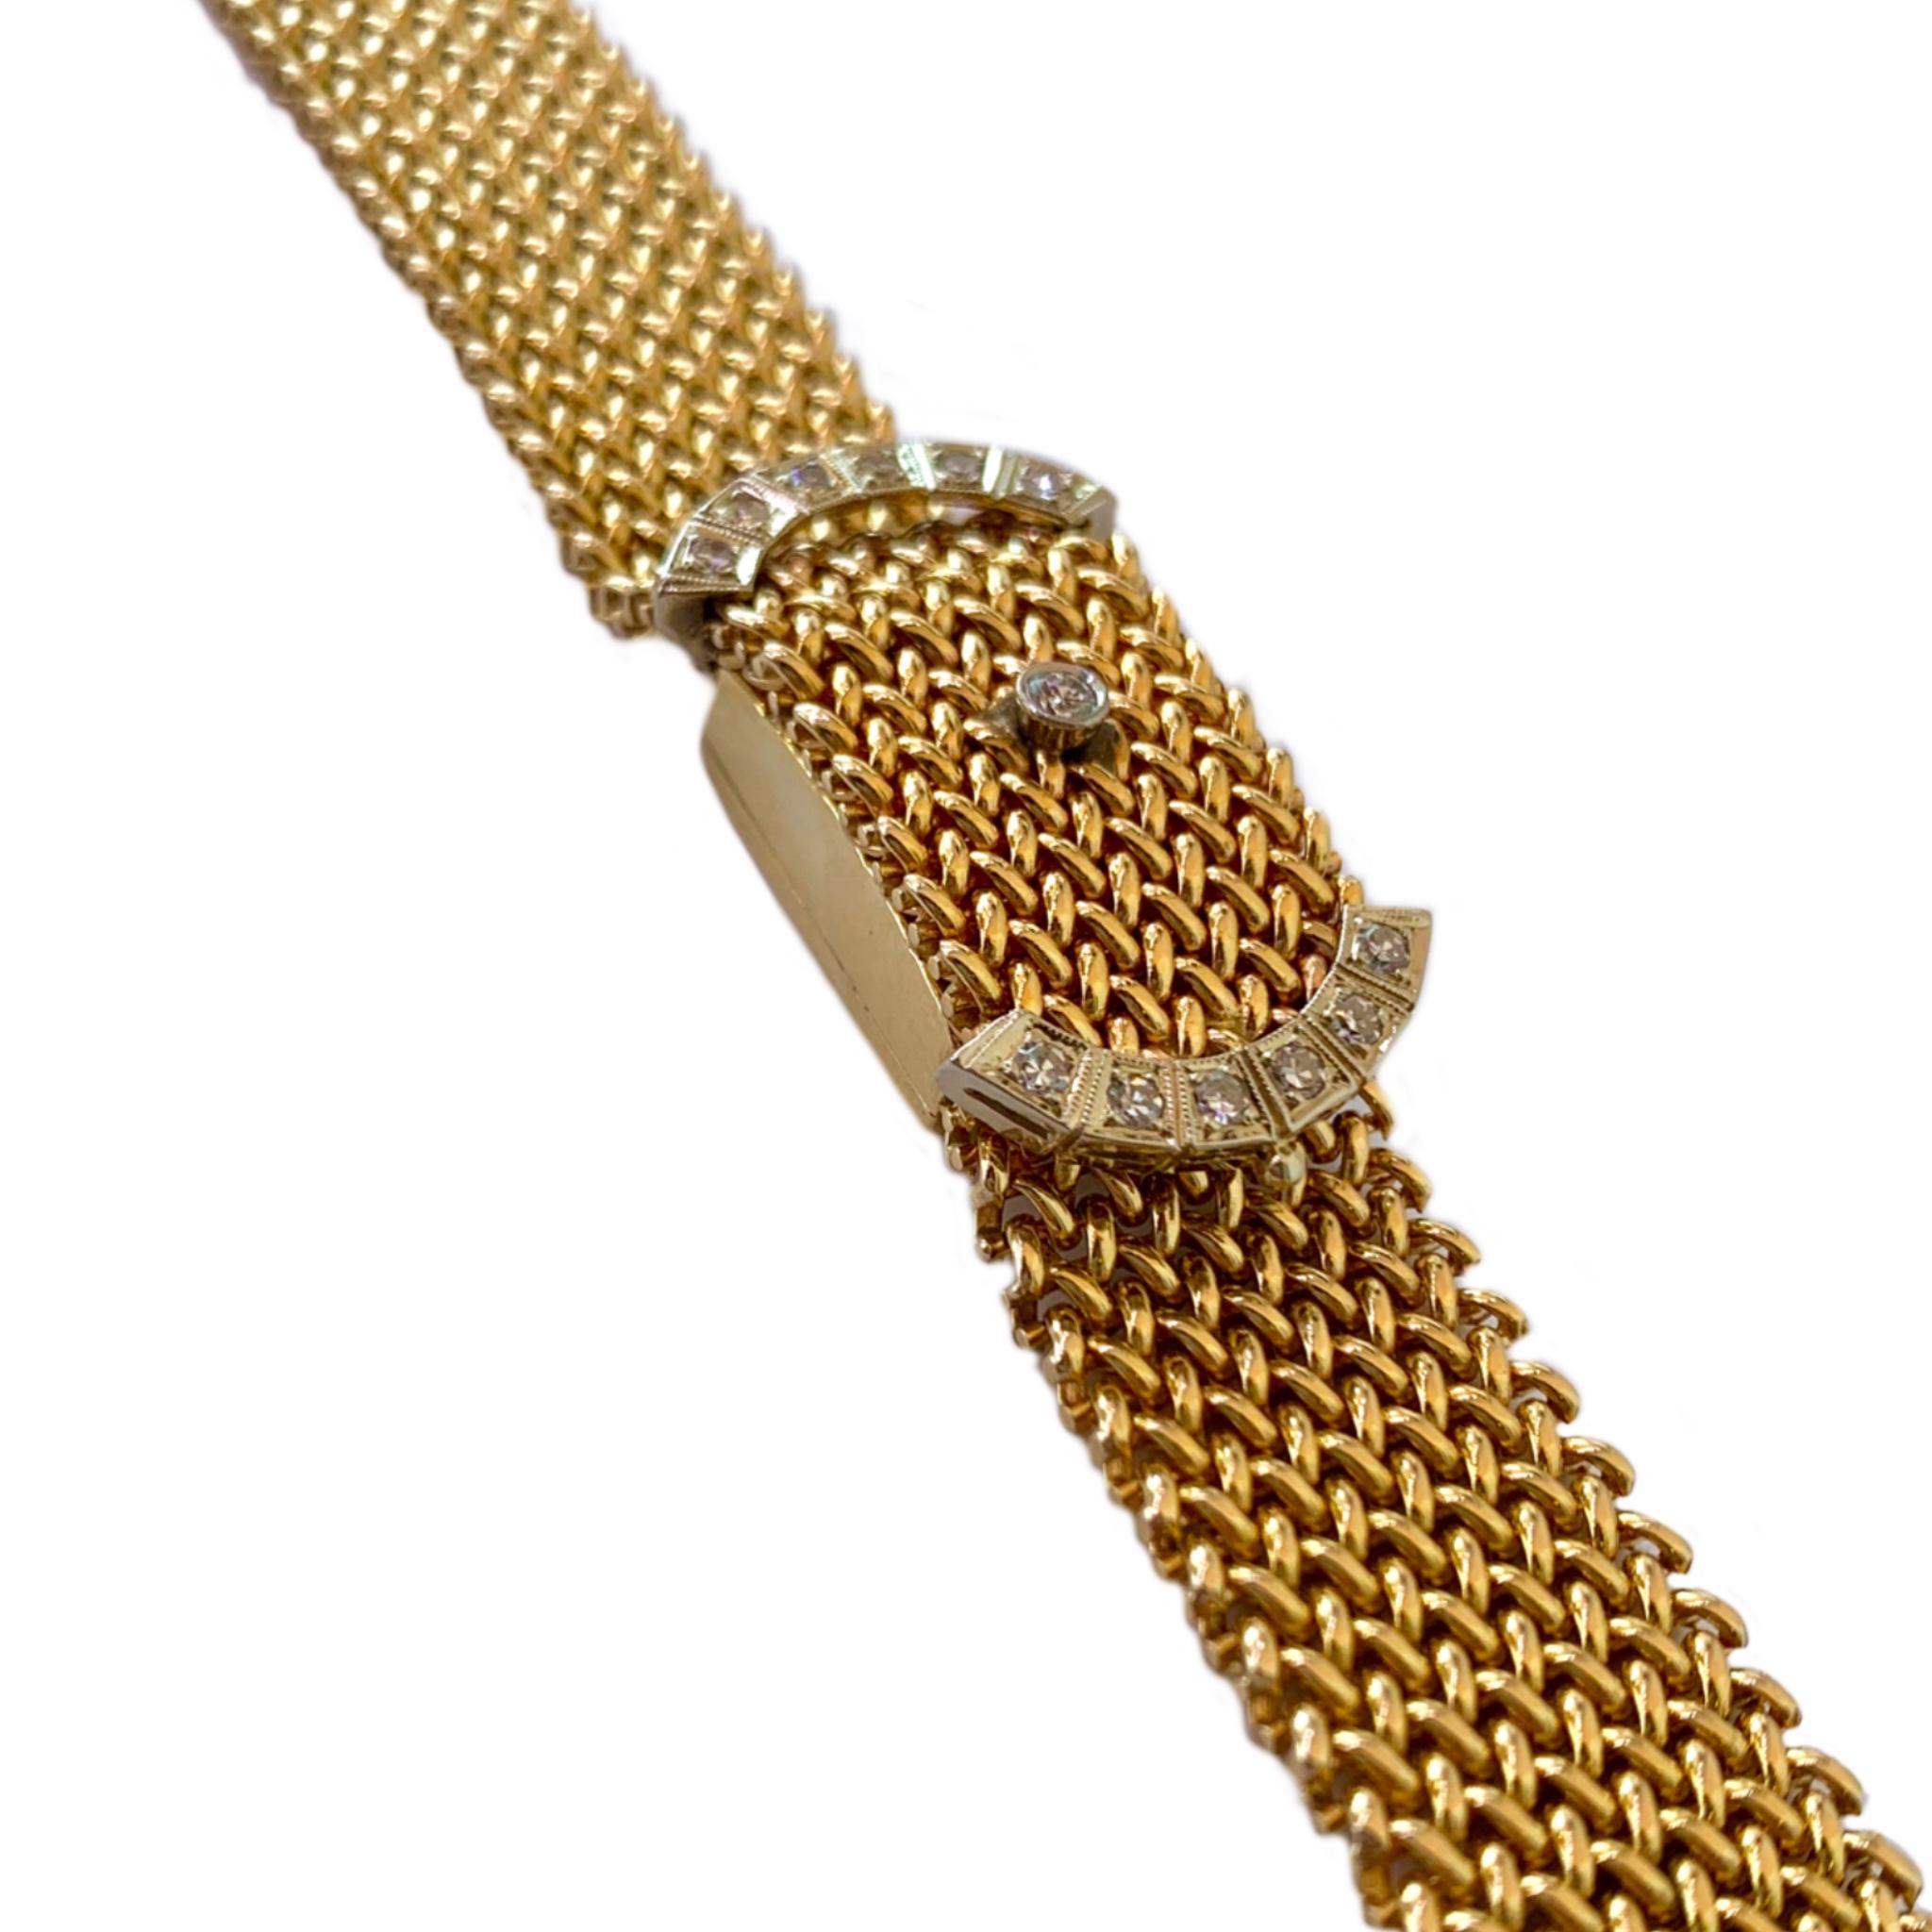 A Hamilton 14 karat yellow gold and diamond vintage bracelet watch. The polished and flexible mesh bracelet is accented with 13 diamonds containing a total weight of approximately .45 carats. The 1960's designed bracelet watch has a 16 mm wide band,